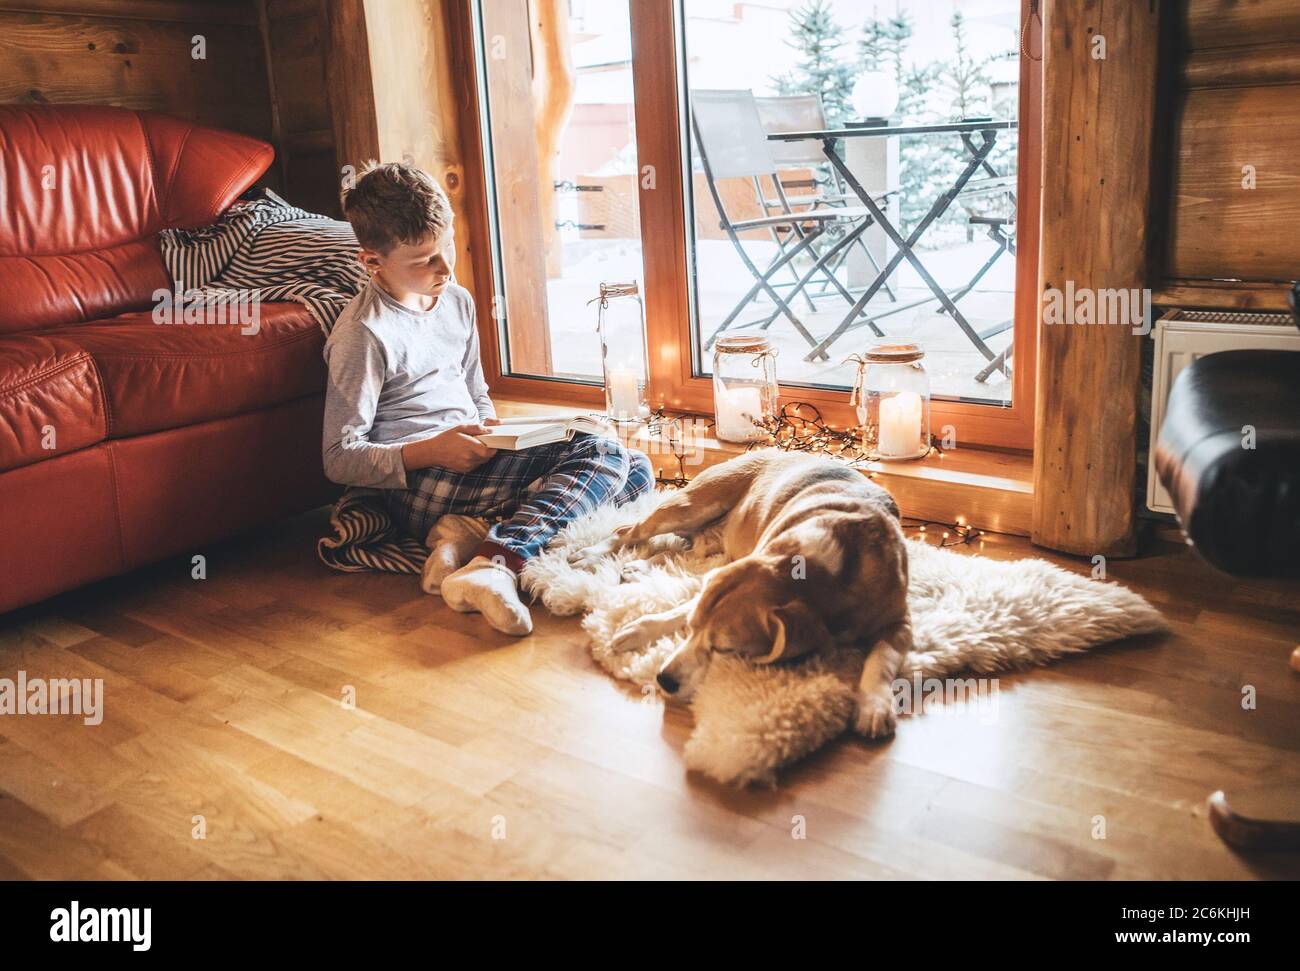 Boy reading book on the floor near slipping his beagle dog on sheepskin in cozy home atmosphere. Peaceful moments of cozy home concept image. Stock Photo